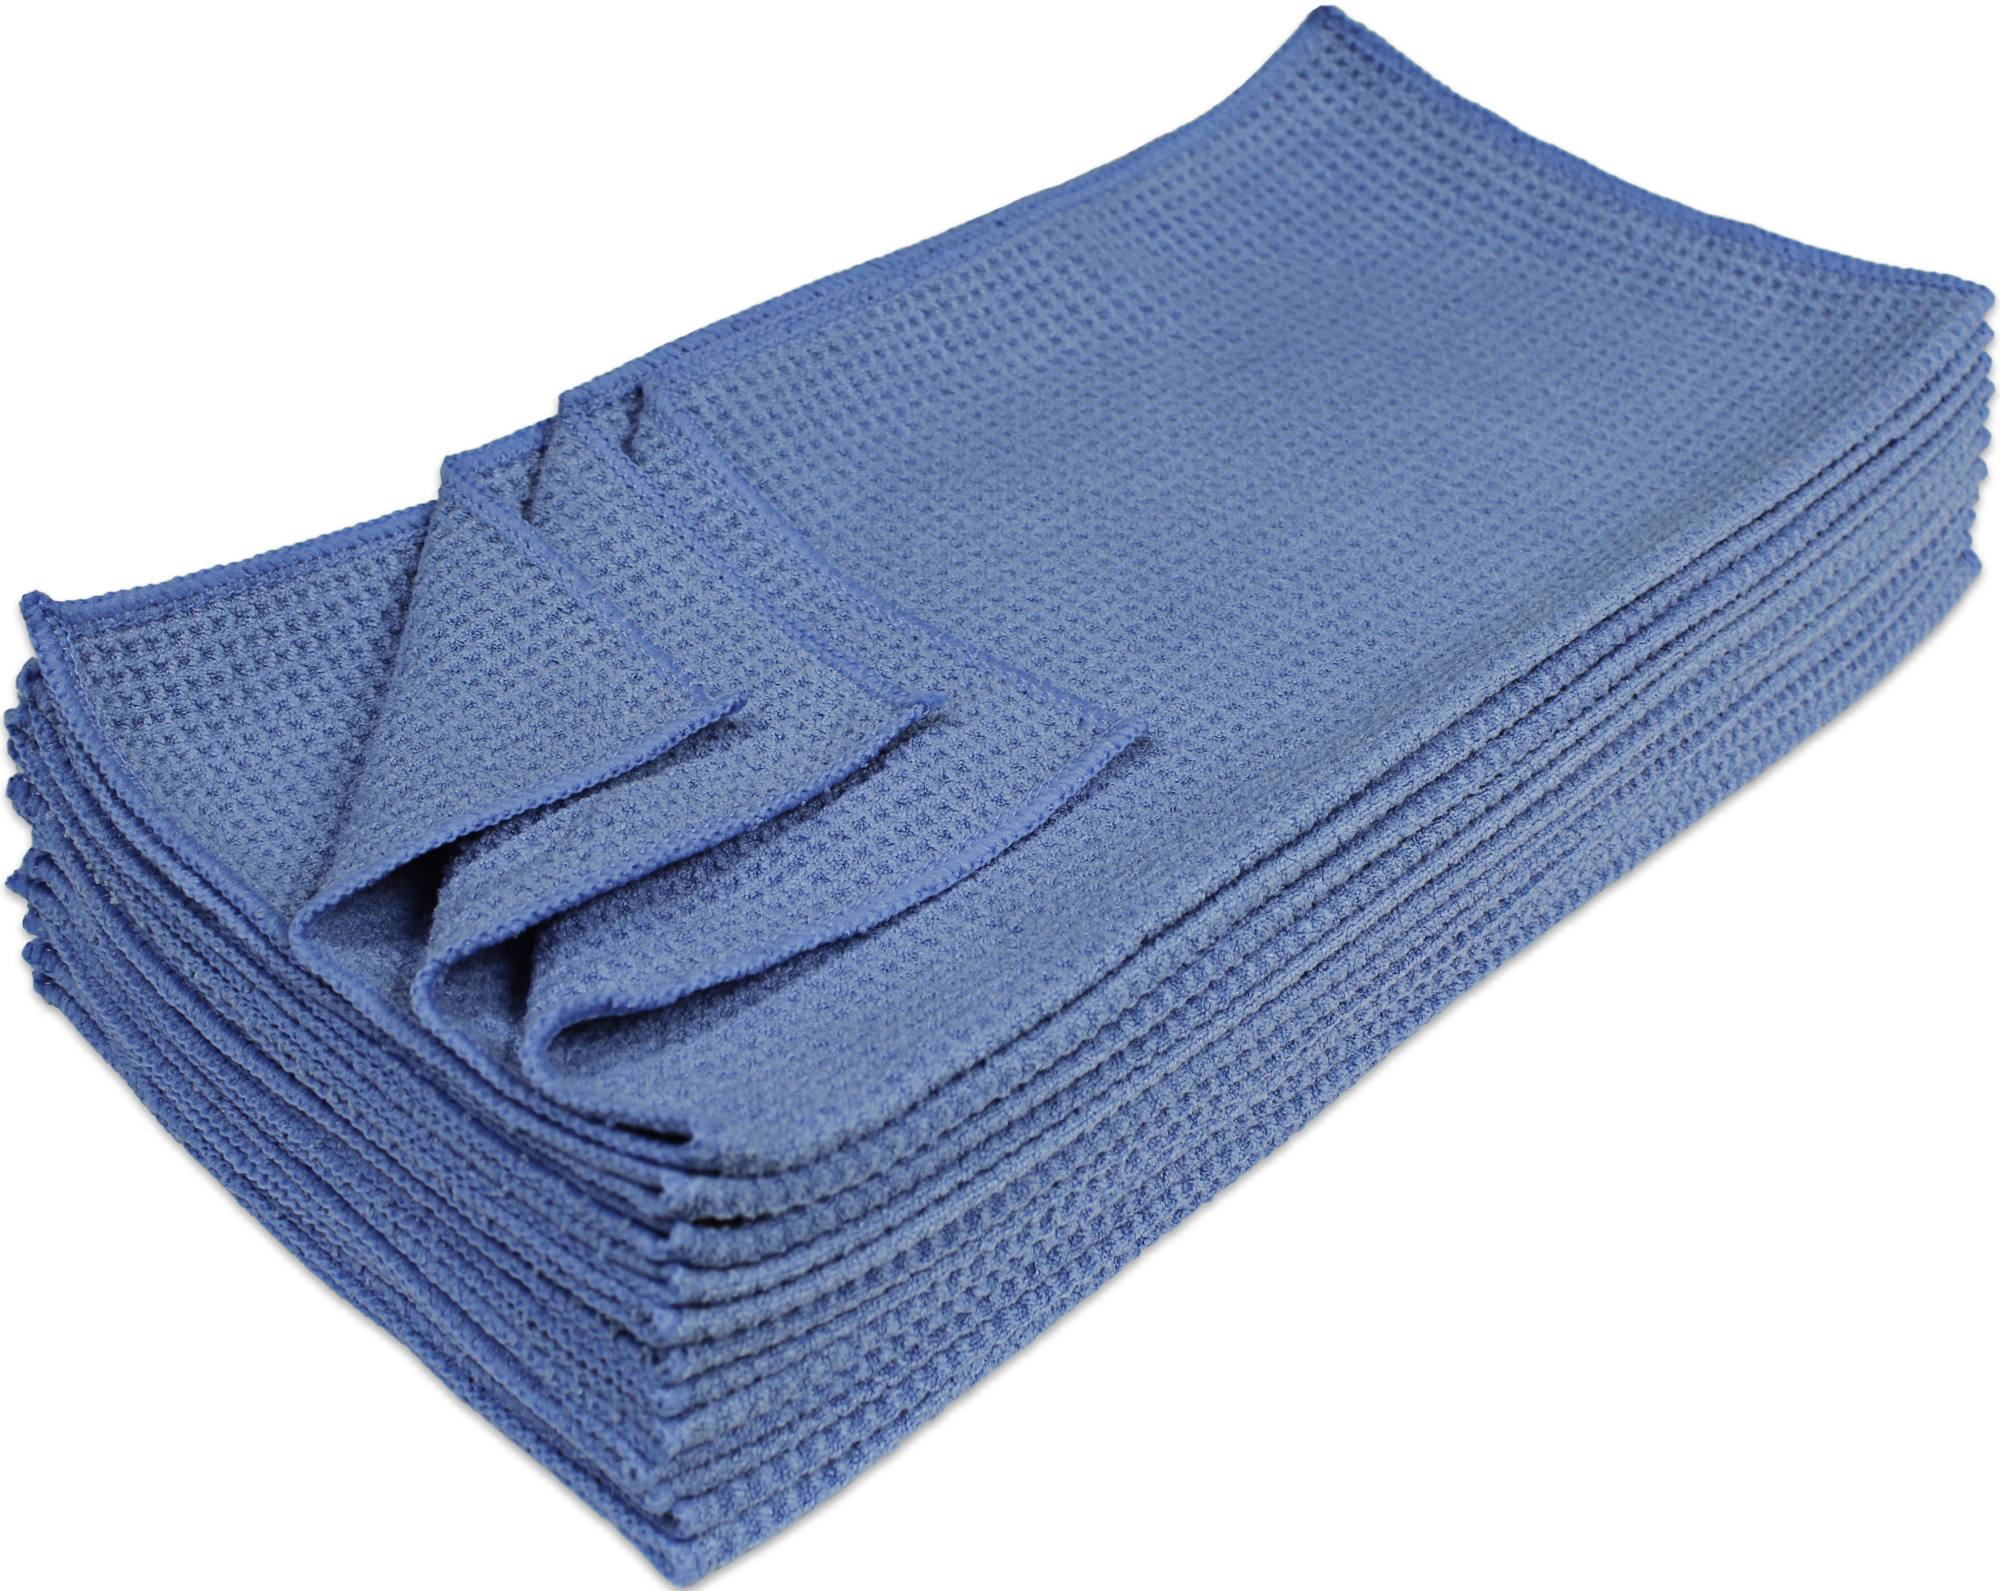 Nouvelle Legende Microfiber Waffle Weave Cleaning Towel, 16 X 16 inches,  Blue, 12 Pack